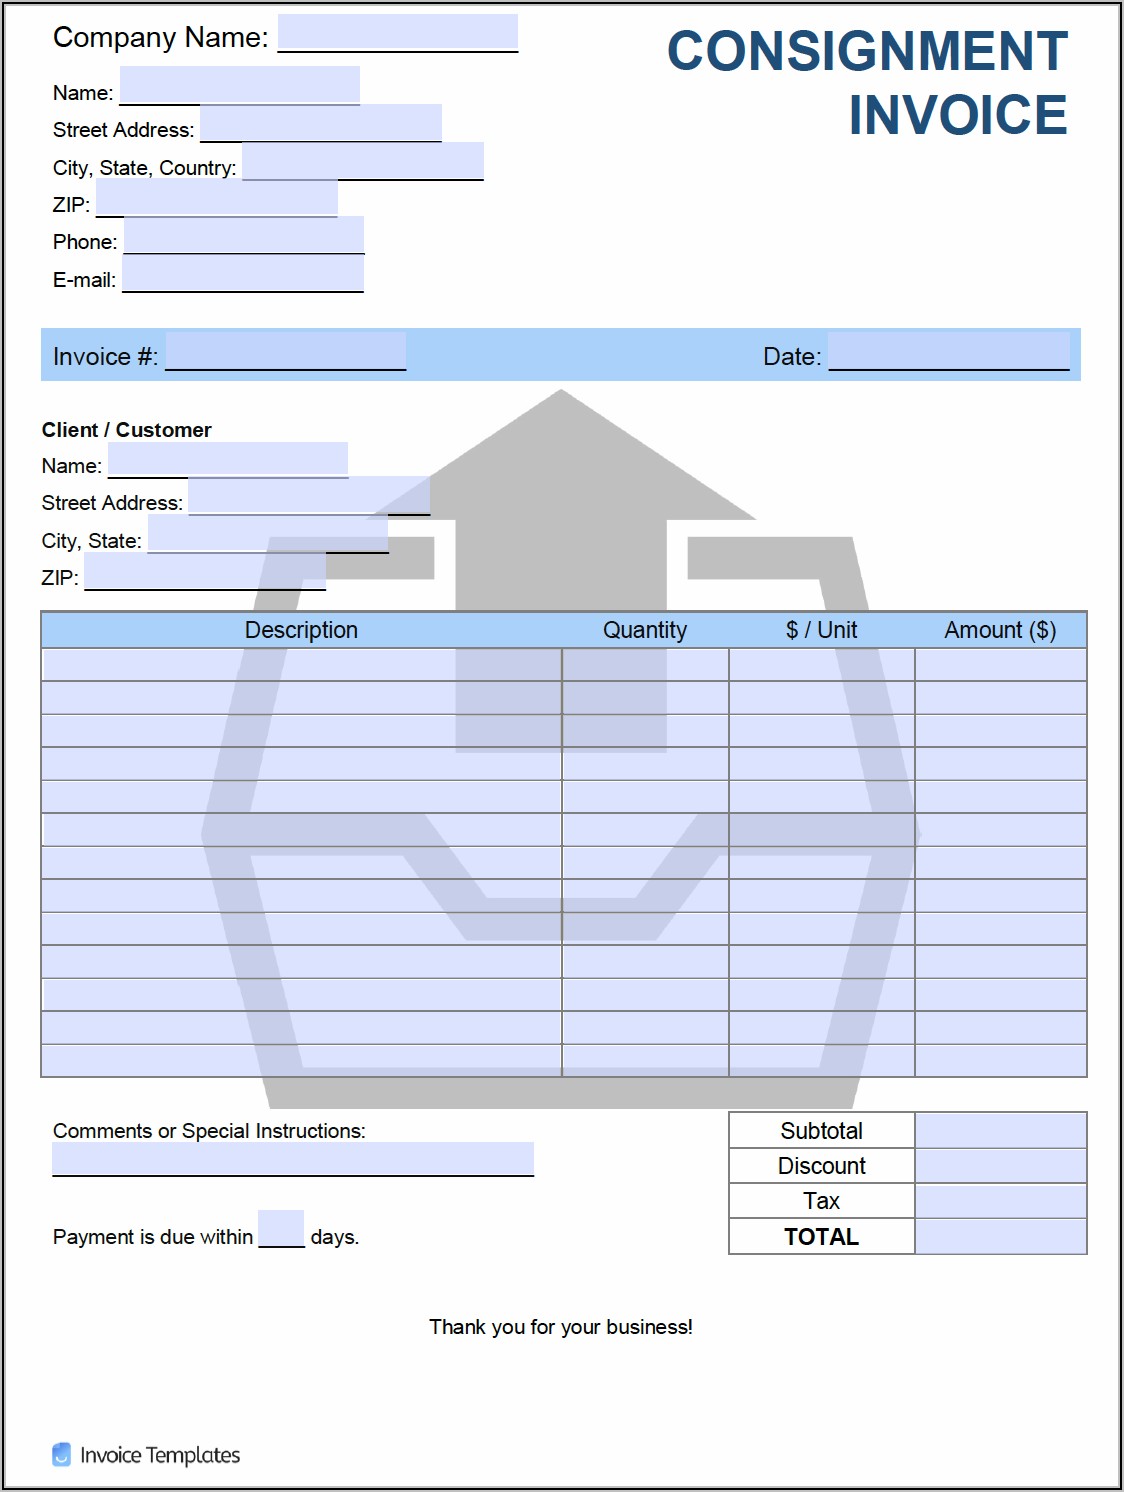 Consignment Invoice Template Word